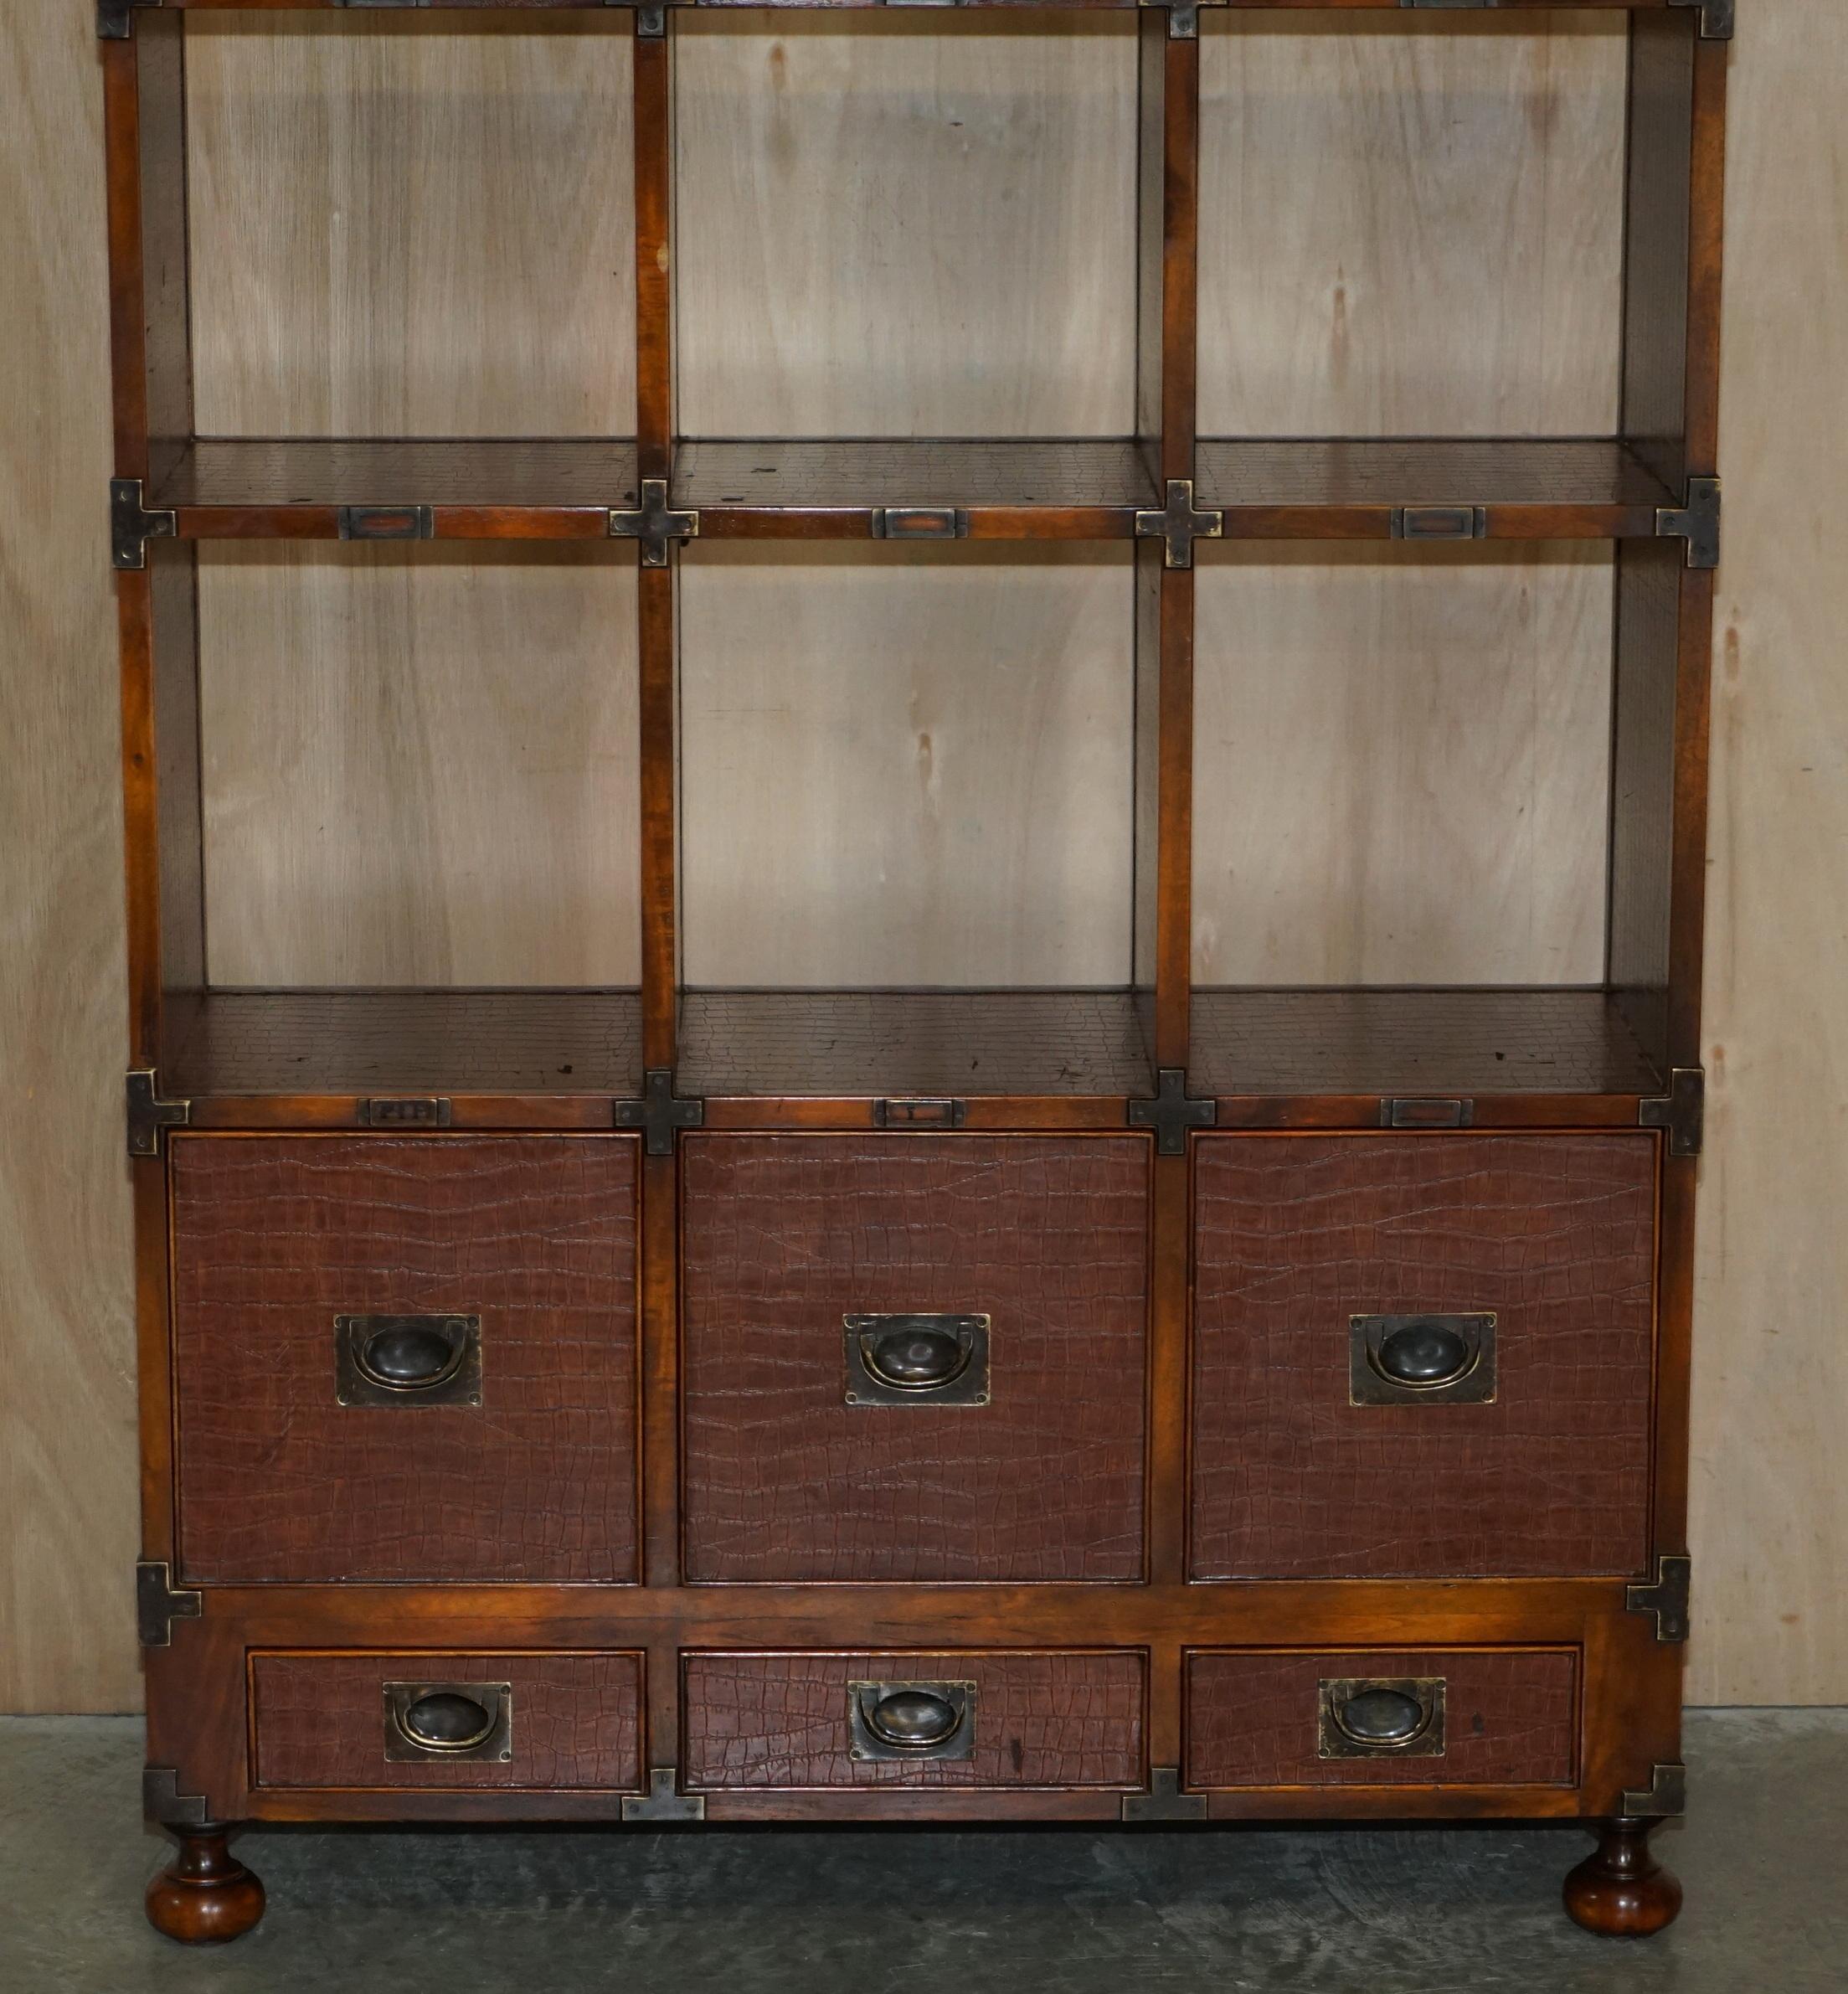 PAIR OF CROCODILE LEATHER Offene LiBRARY-BOOKCASES MIT DRAWERS & RECORD SLOTS (Handgefertigt) im Angebot